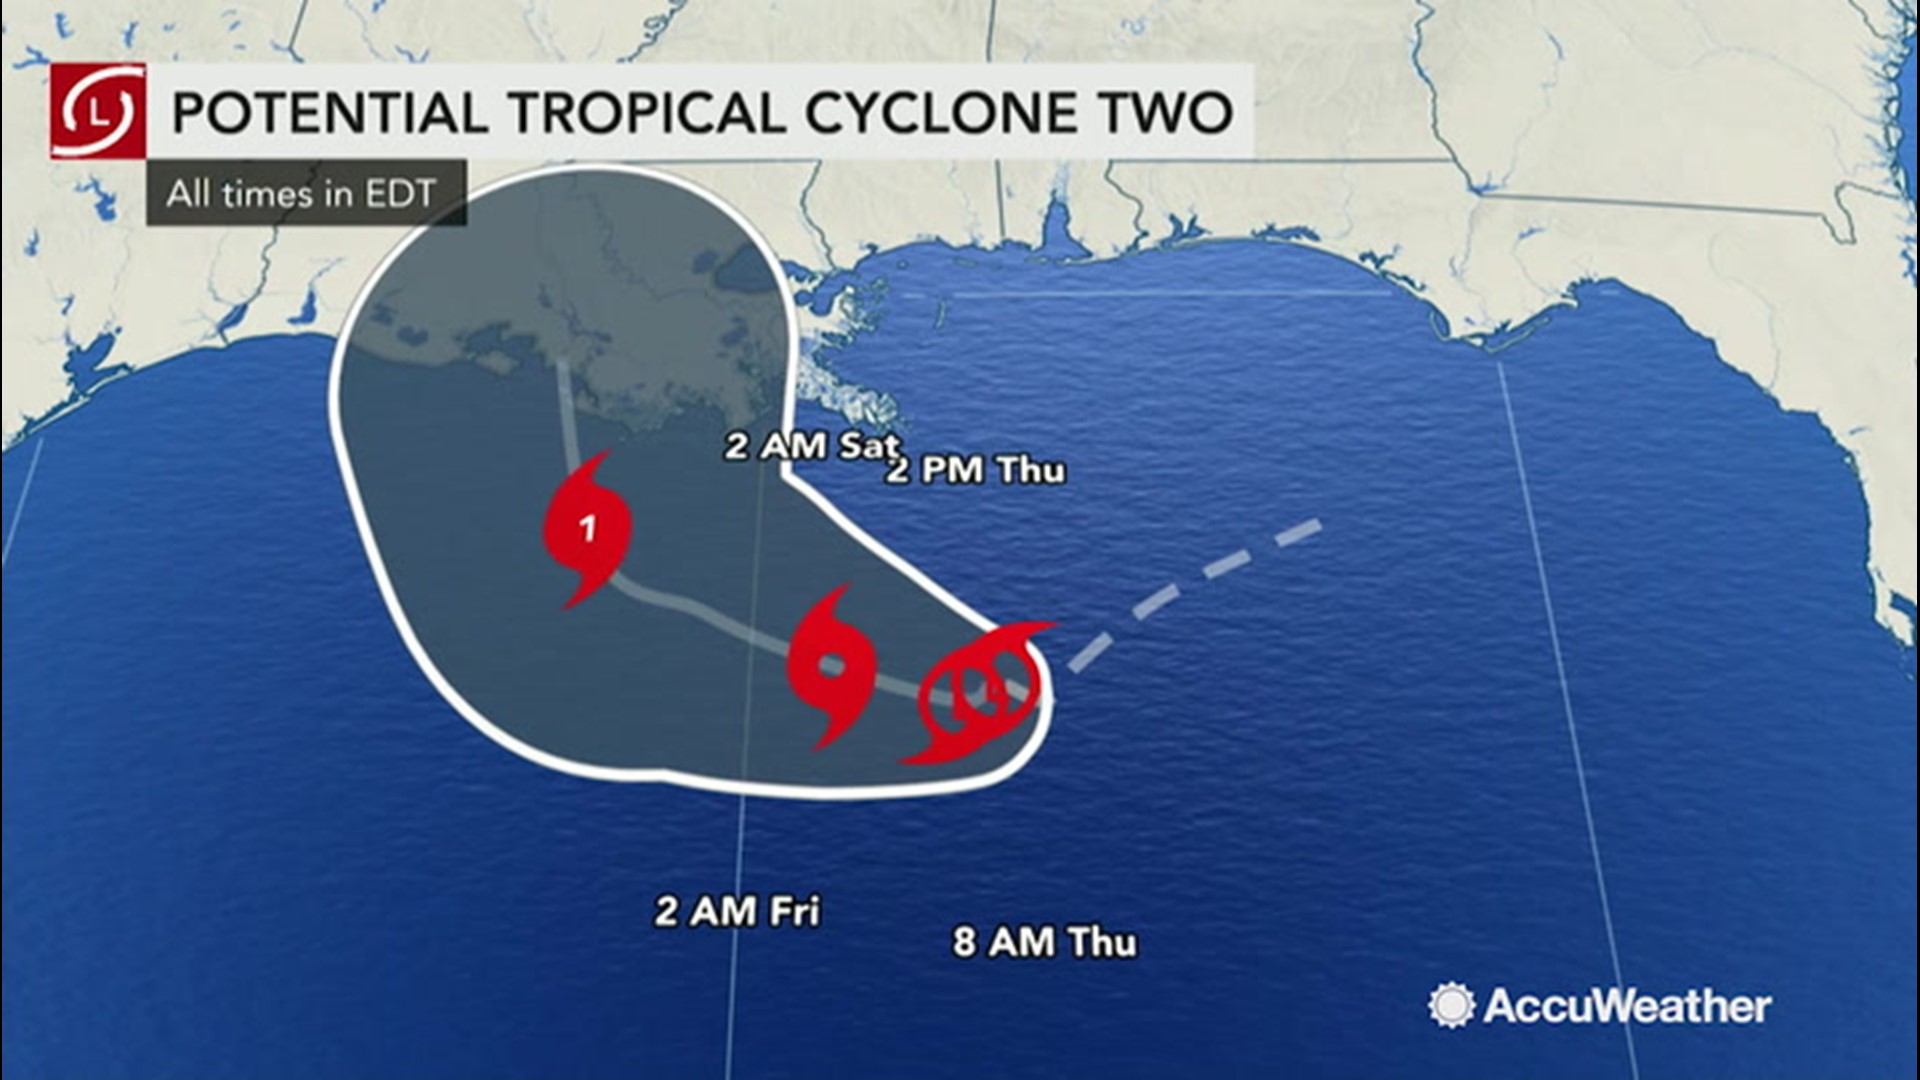 A potential tropical cyclone is expected to form into Tropical Storm Barry and strengthen into a category 1 hurricane by Saturday.  AccuWeather meteorologist Bernie Rayno warns that even though it's expected to be a category 1 hurricane, the impact of the storm could potential be much more severe.